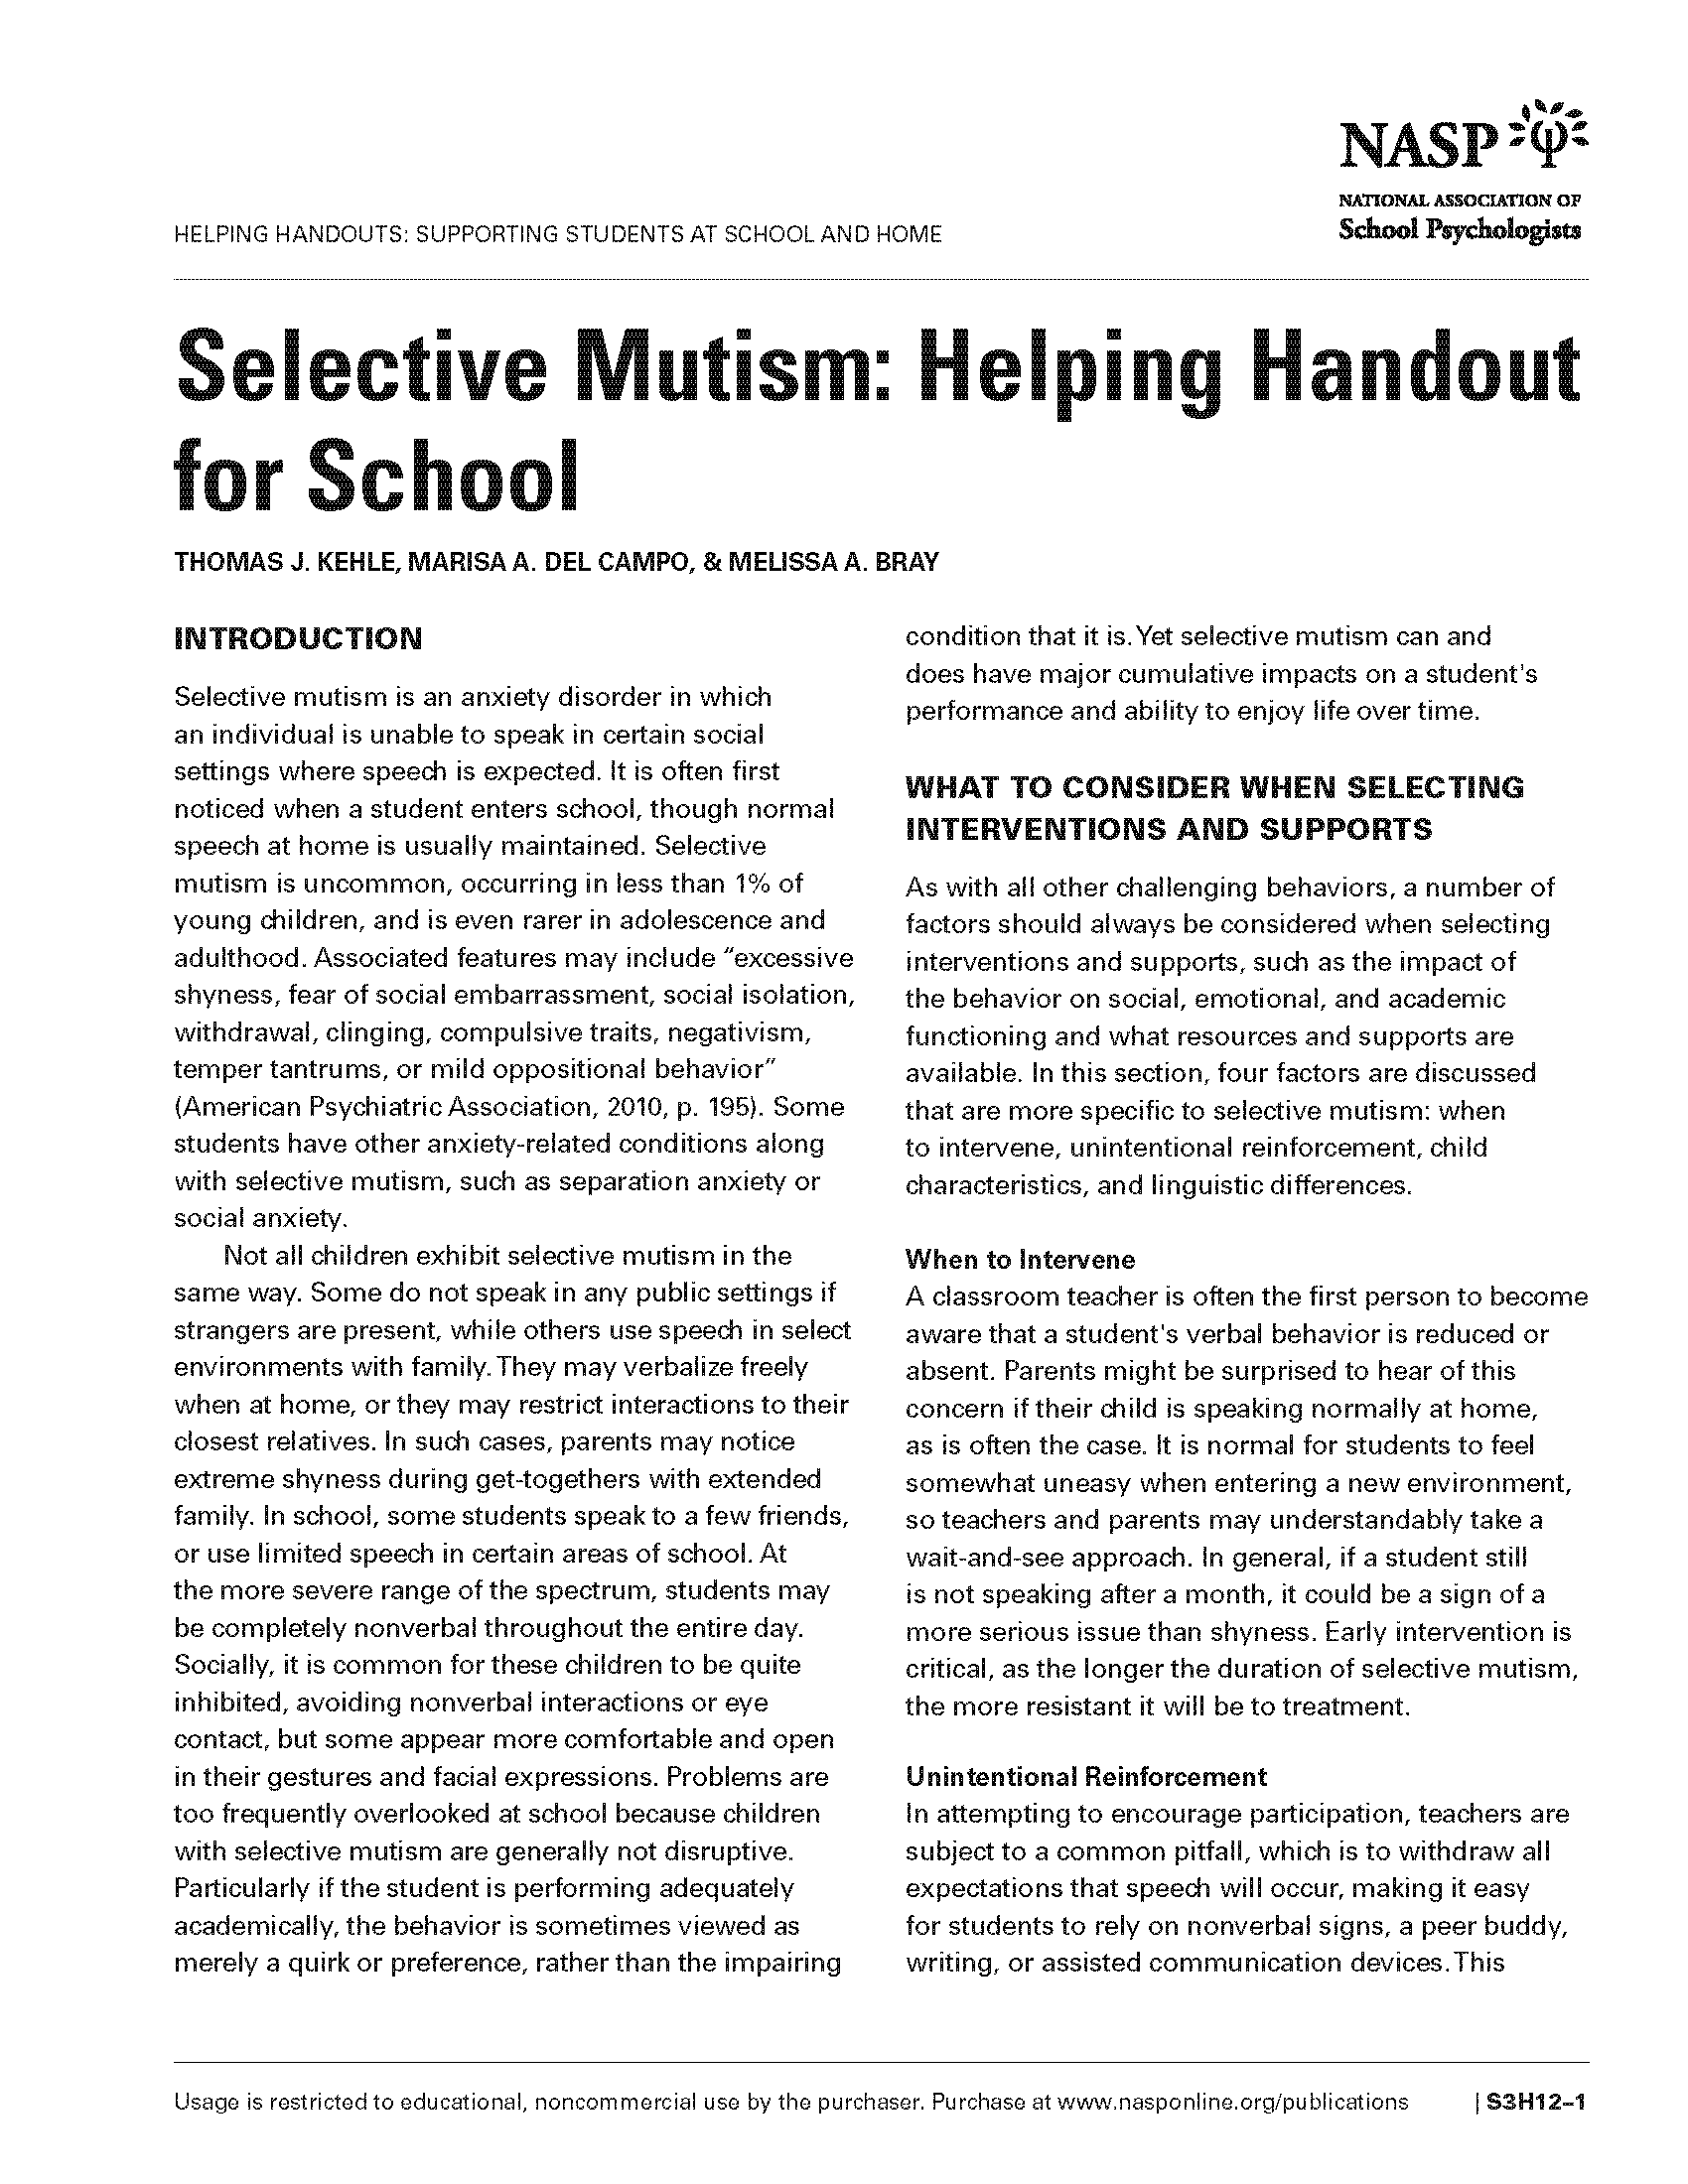 Selective Mutism: Helping Handout for School